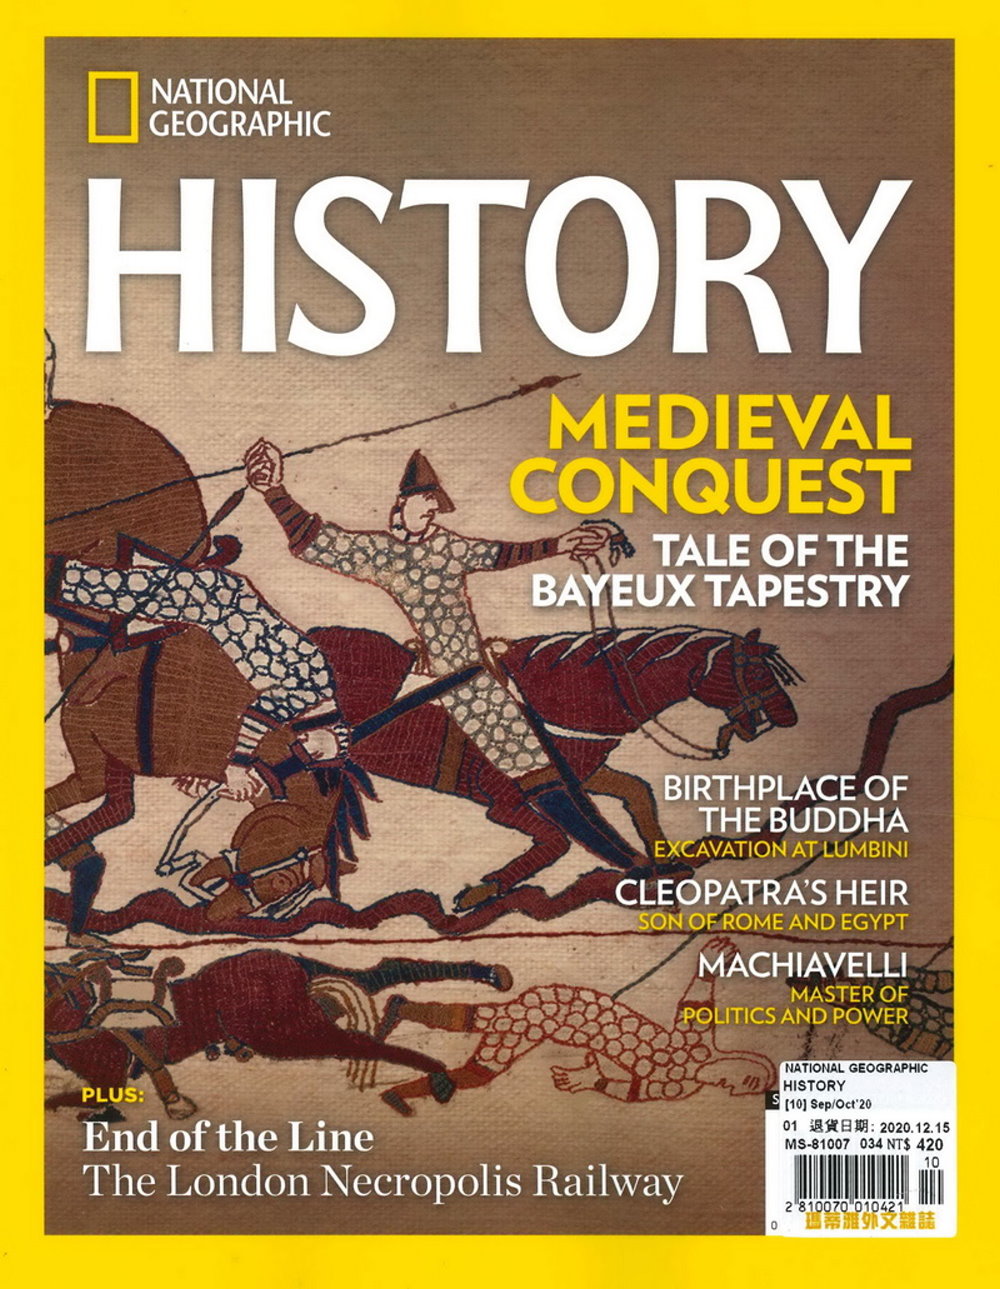 NATIONAL GEOGRAPHIC HISTORY 9-10月號/2020